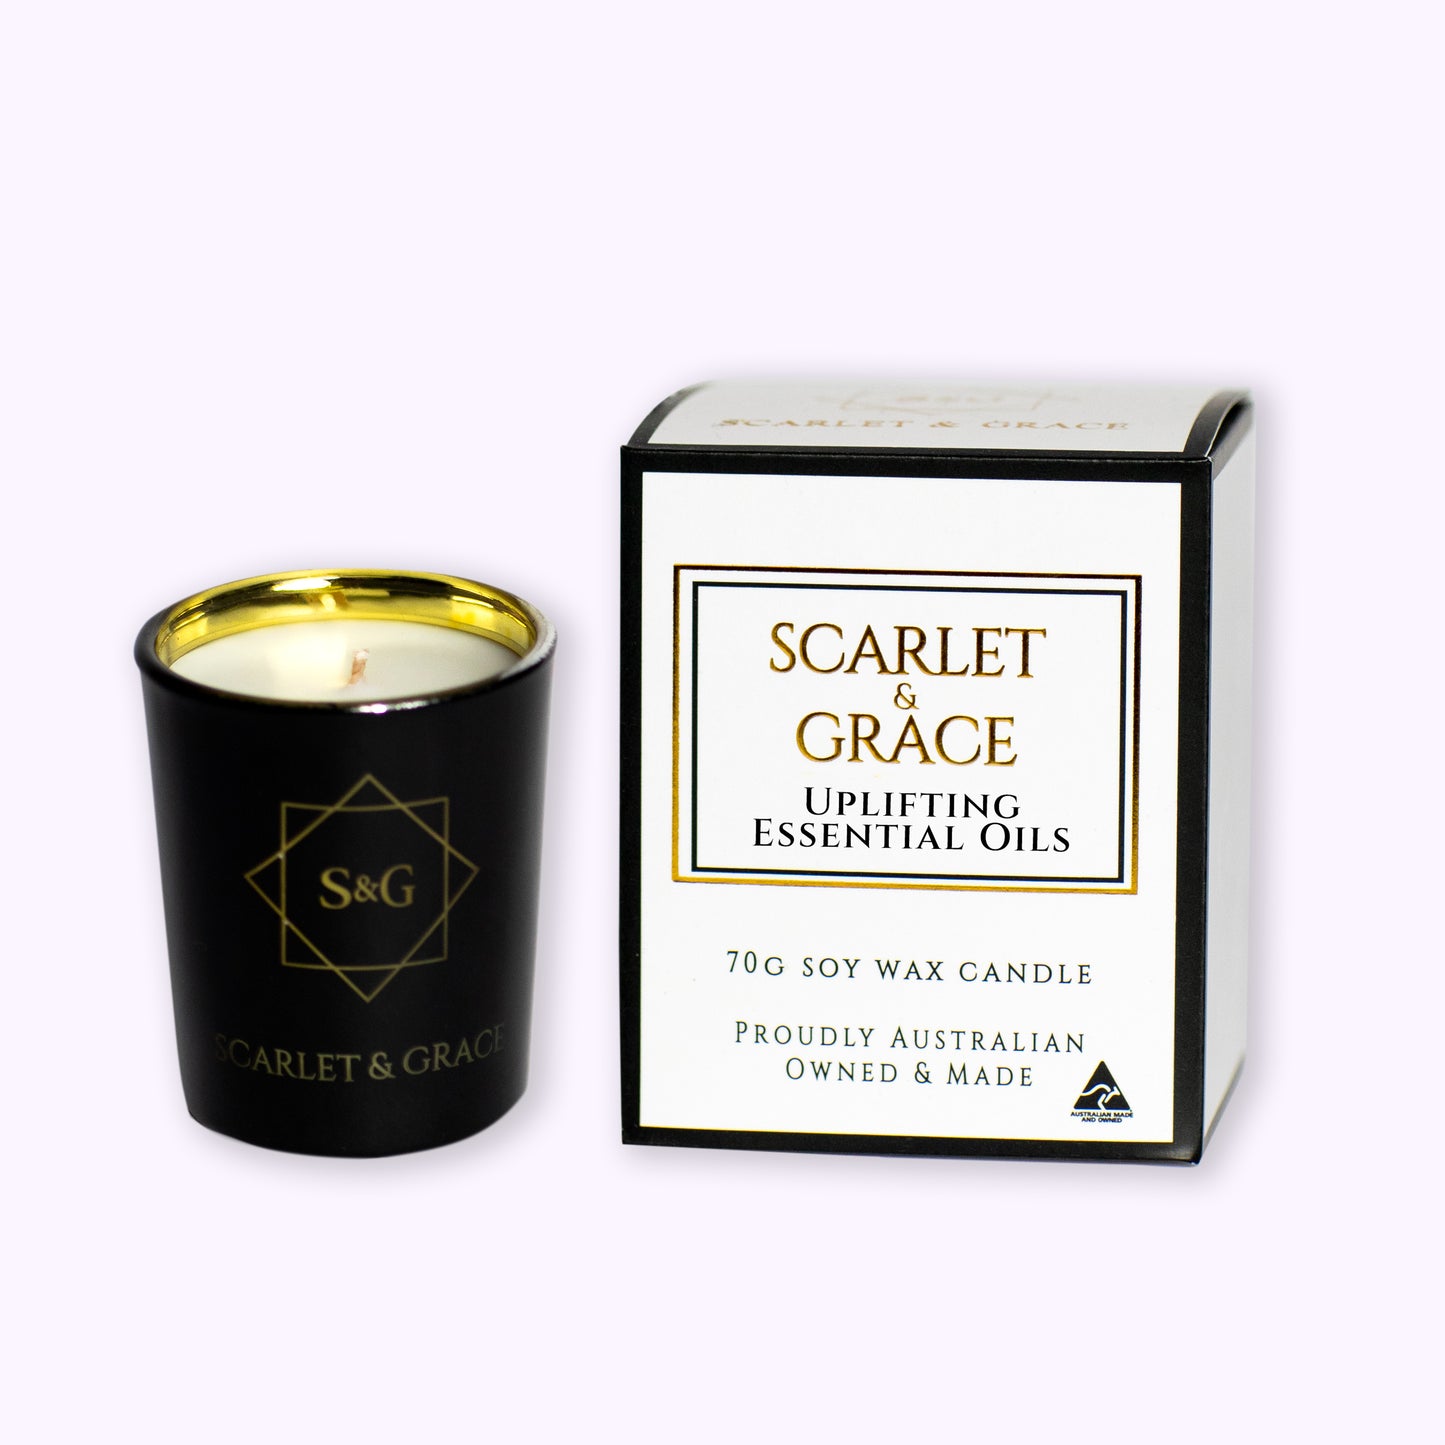 Uplifting Essential Oils - 70gm Soy Wax Candle - Scarlet & Grace